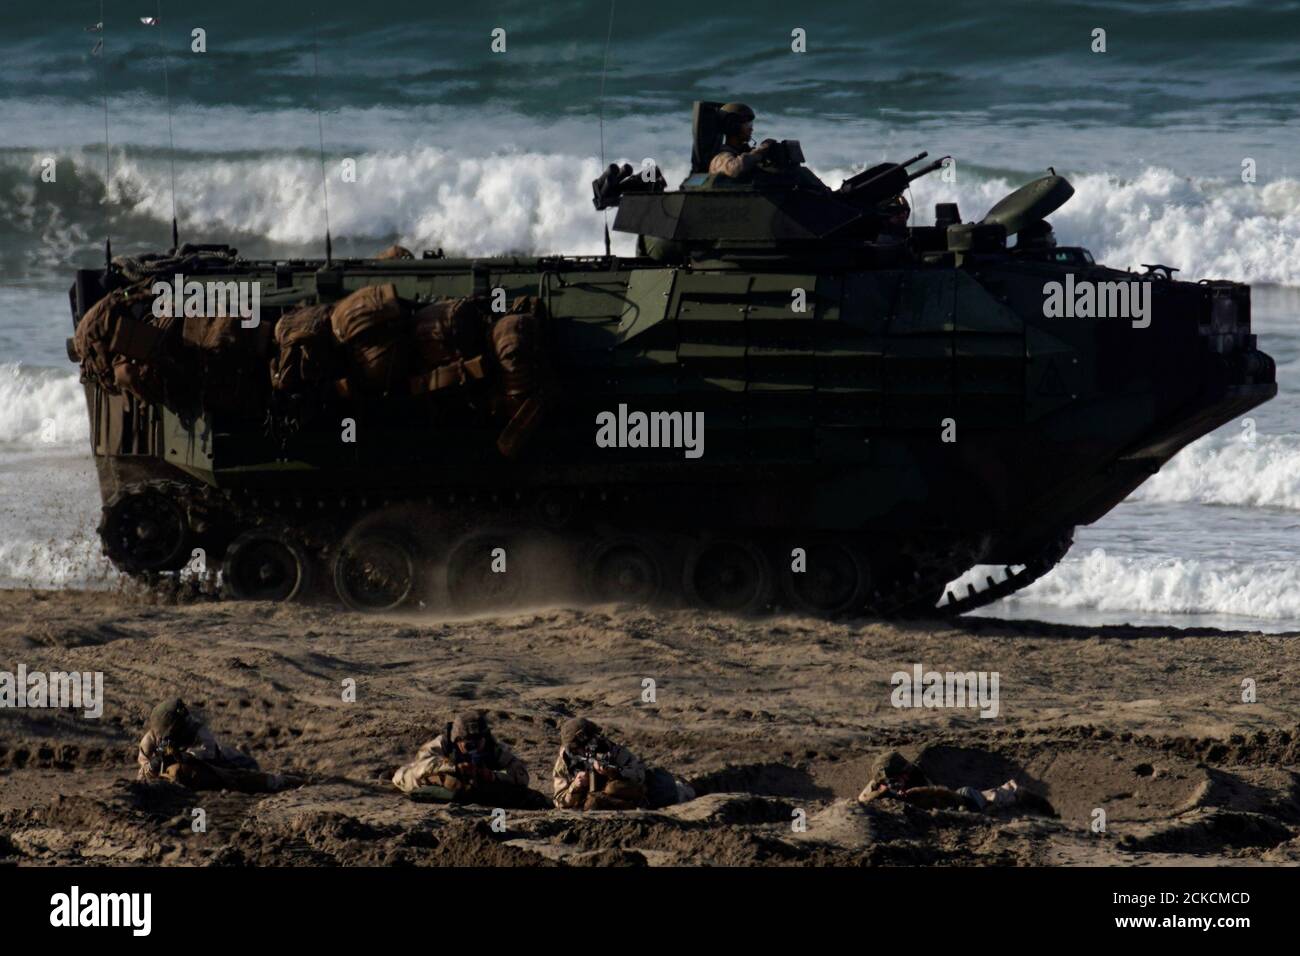 Marines and sailors from the 1st Marine Division conduct an amphibious landing as they participate in 'Exercise Steel Knight' comprising of approximately 13,000 personnel include critical combat and combat service support elements from across I Marine Expeditionary Force (MEF) at Camp Pendleton, California, U.S., December 6, 2019.   REUTERS/Mike Blake Stock Photo